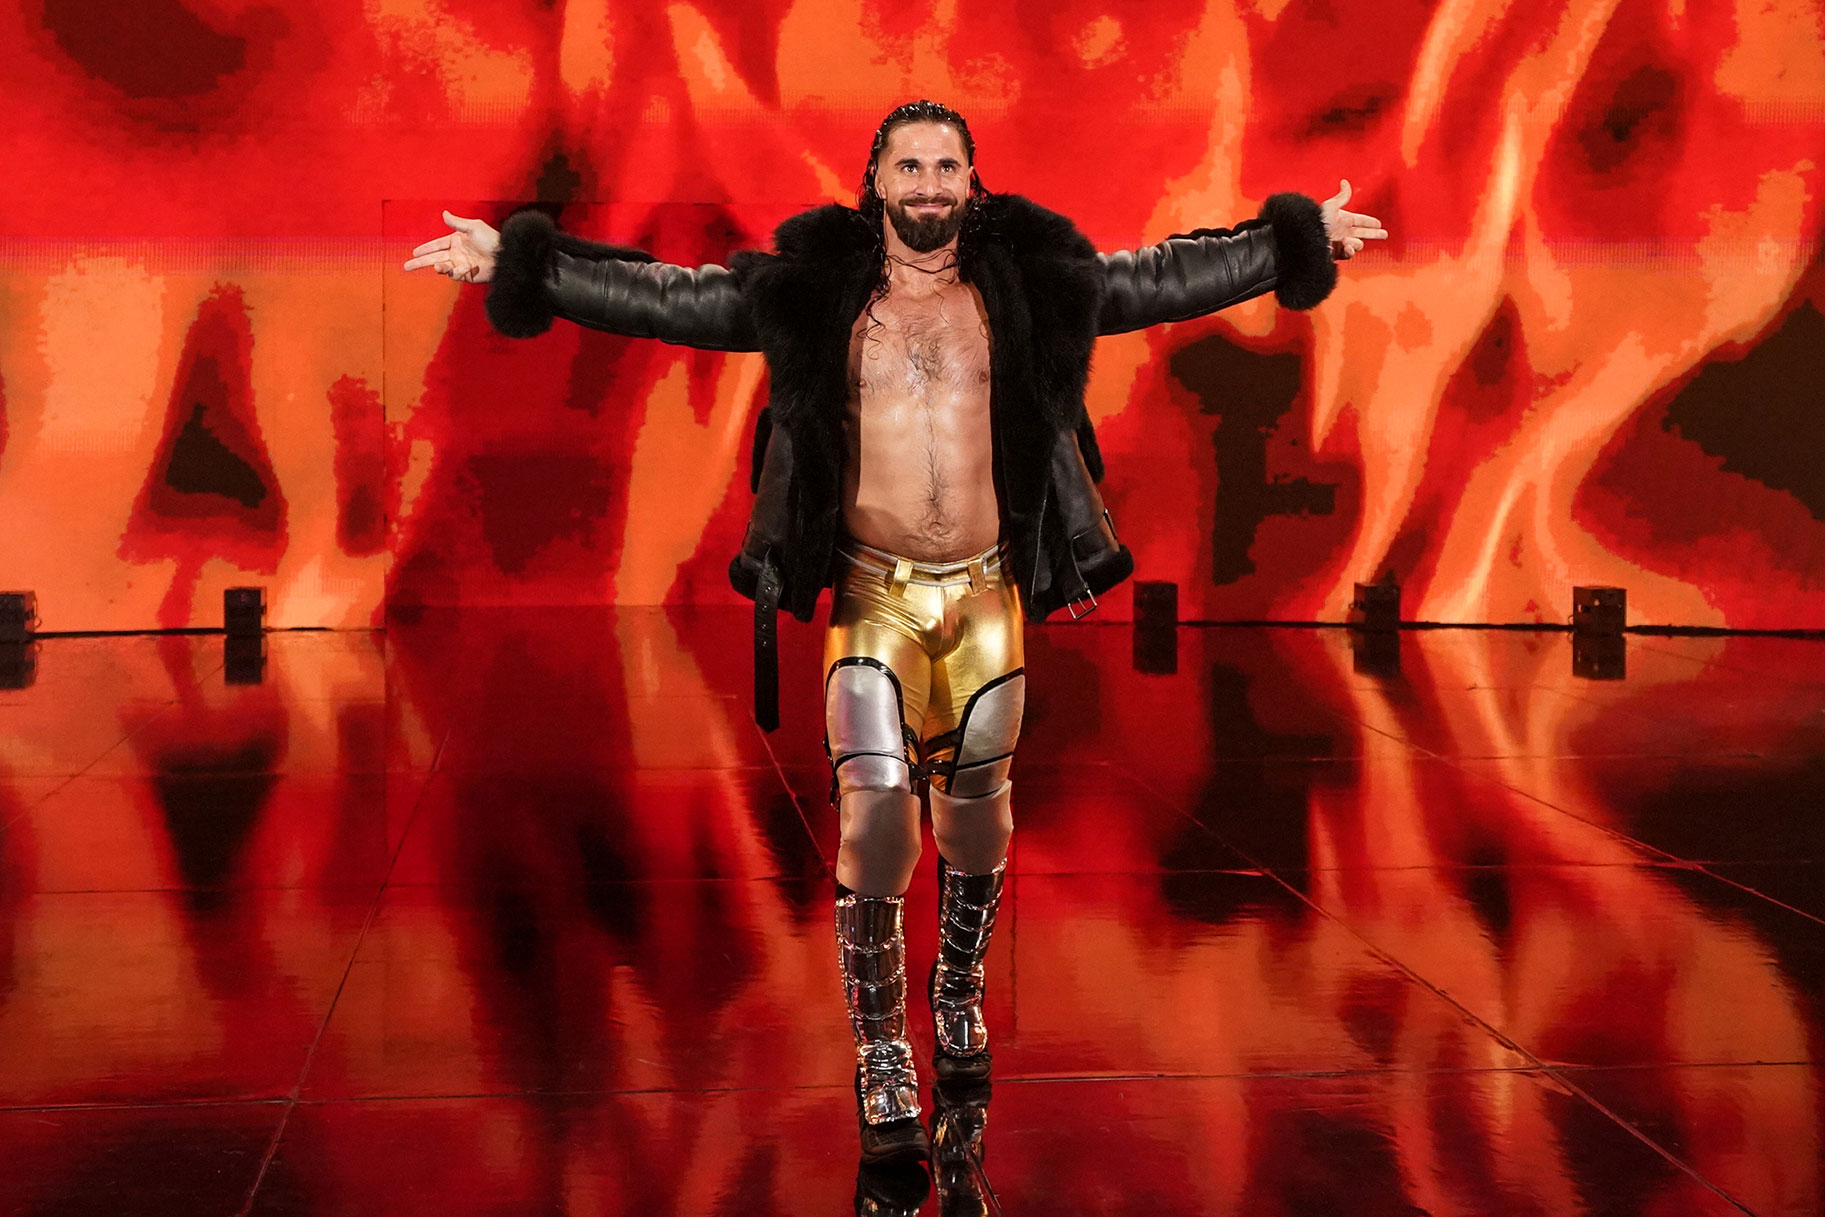 Seth Rollins walking to the ring with both arms outstretched